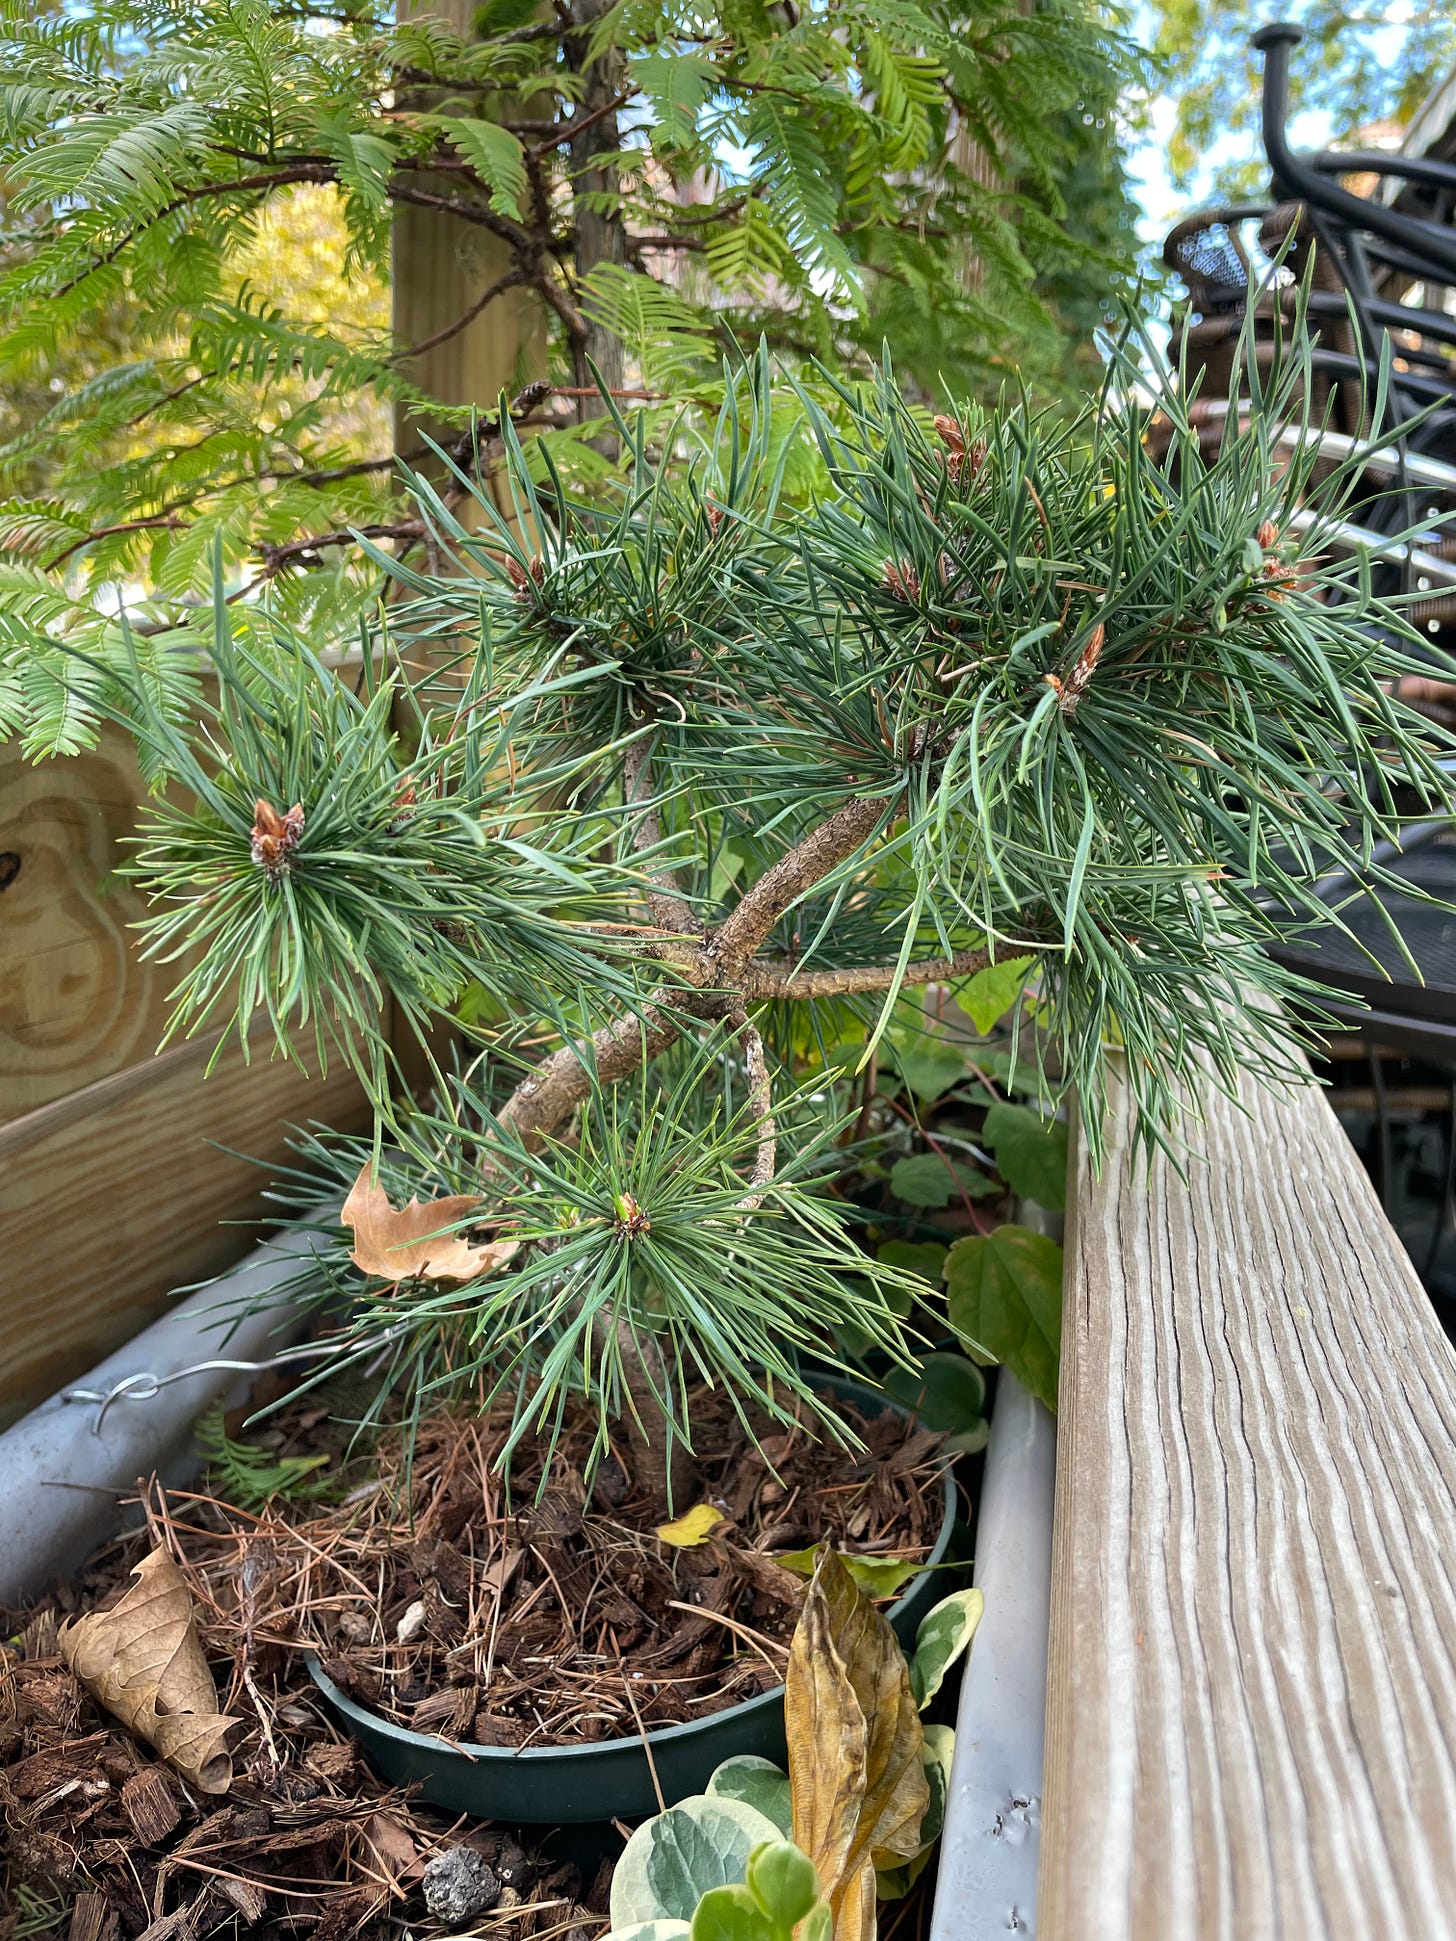 ID: Photo of the whole pine pre bonsai, taken from the side, showing a curvy trunk and many branches emerging from the same few points.